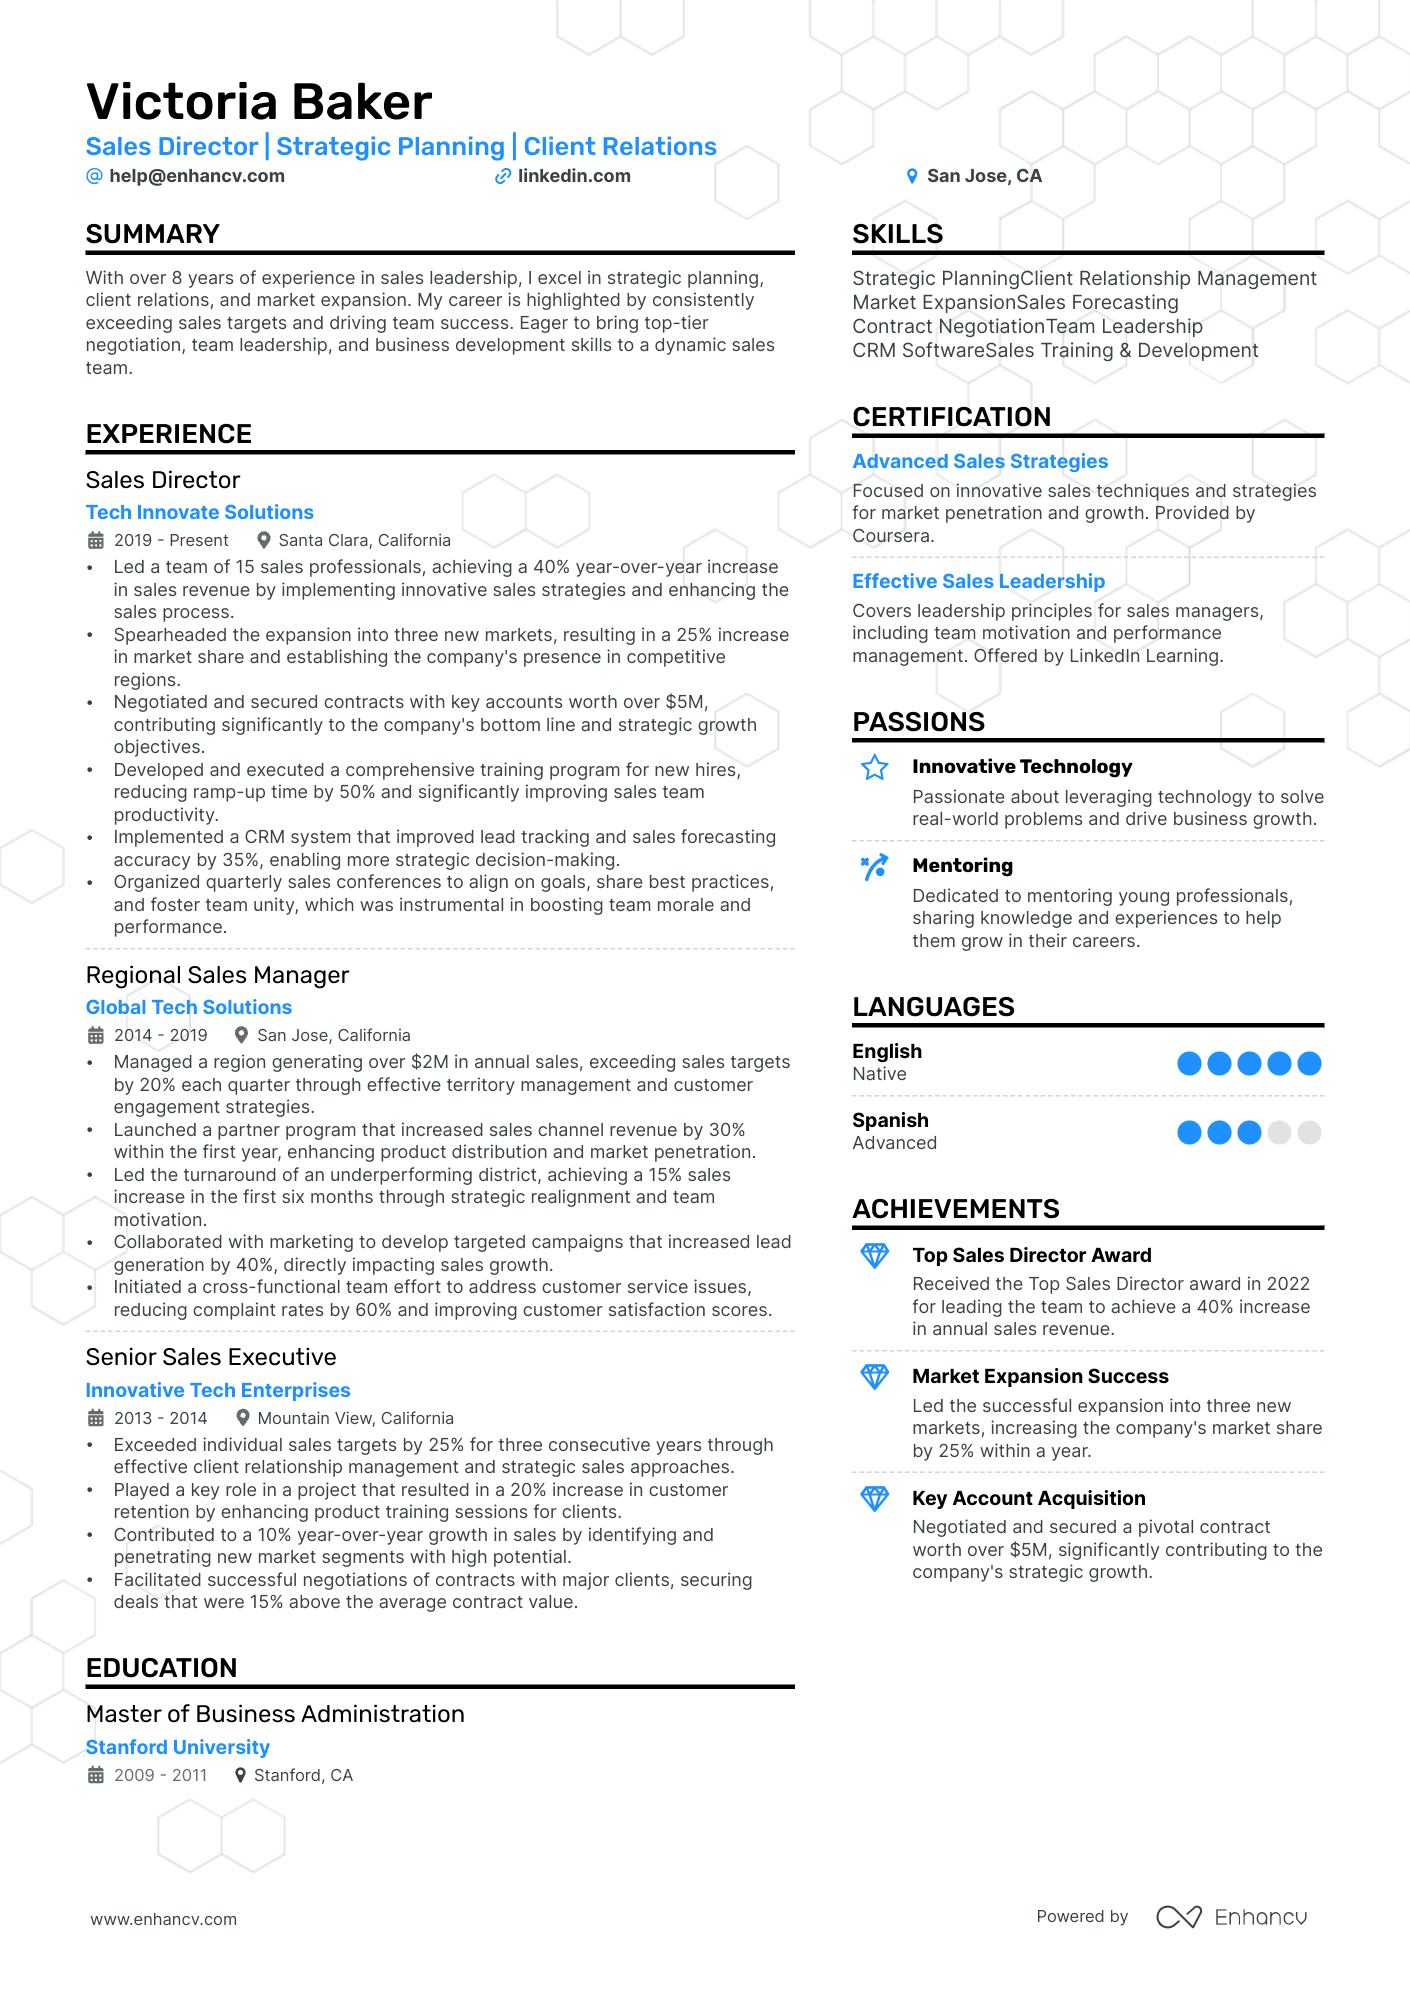 Sales Director | Strategic Planning | Client Relations resume example